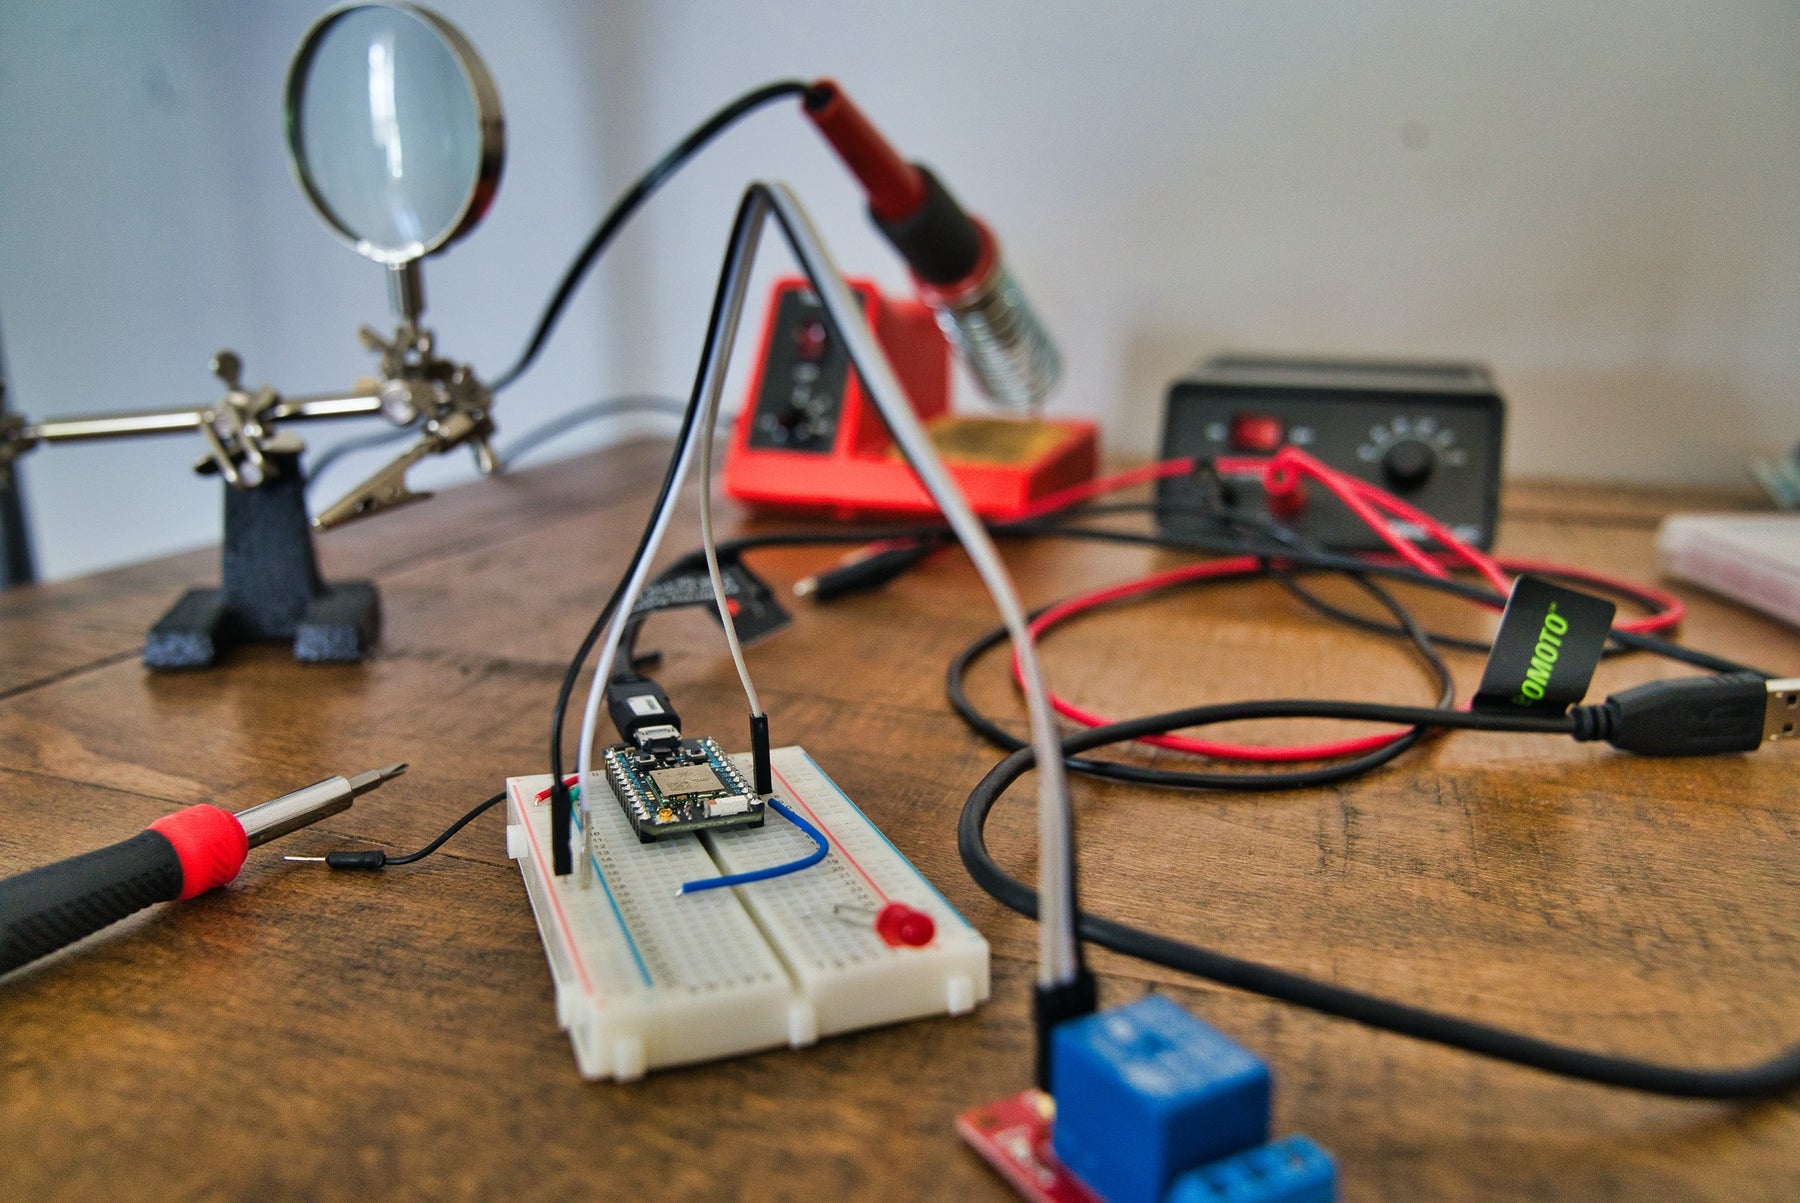 Soldering iron with red handle and other essential electronic equipment arranged on a table